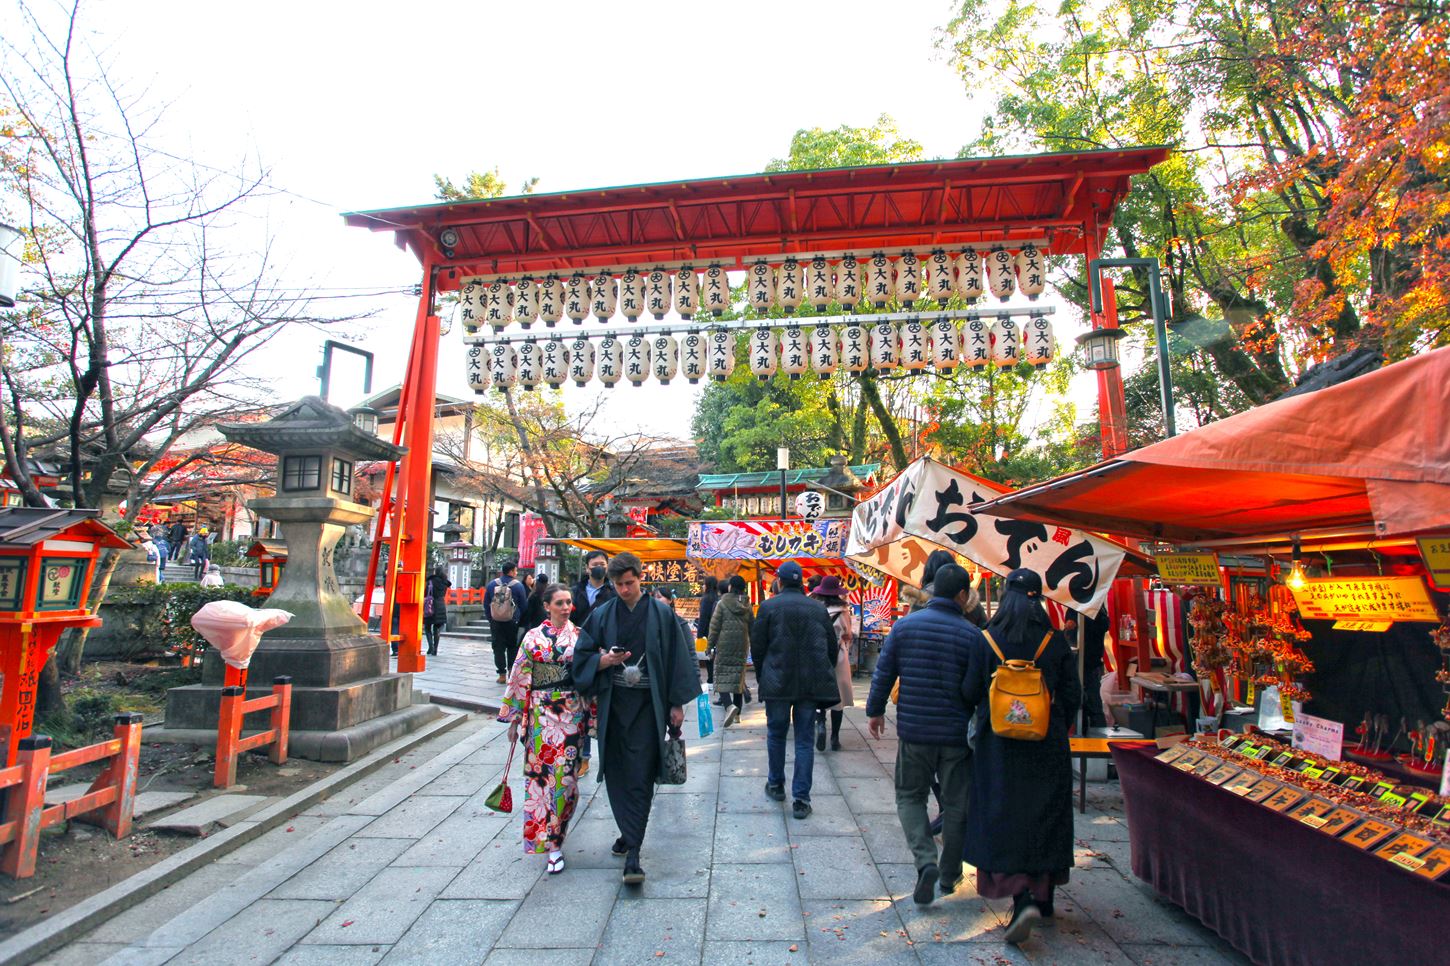 Sightseeing scenery that simply shows the weather in Kyoto in December6